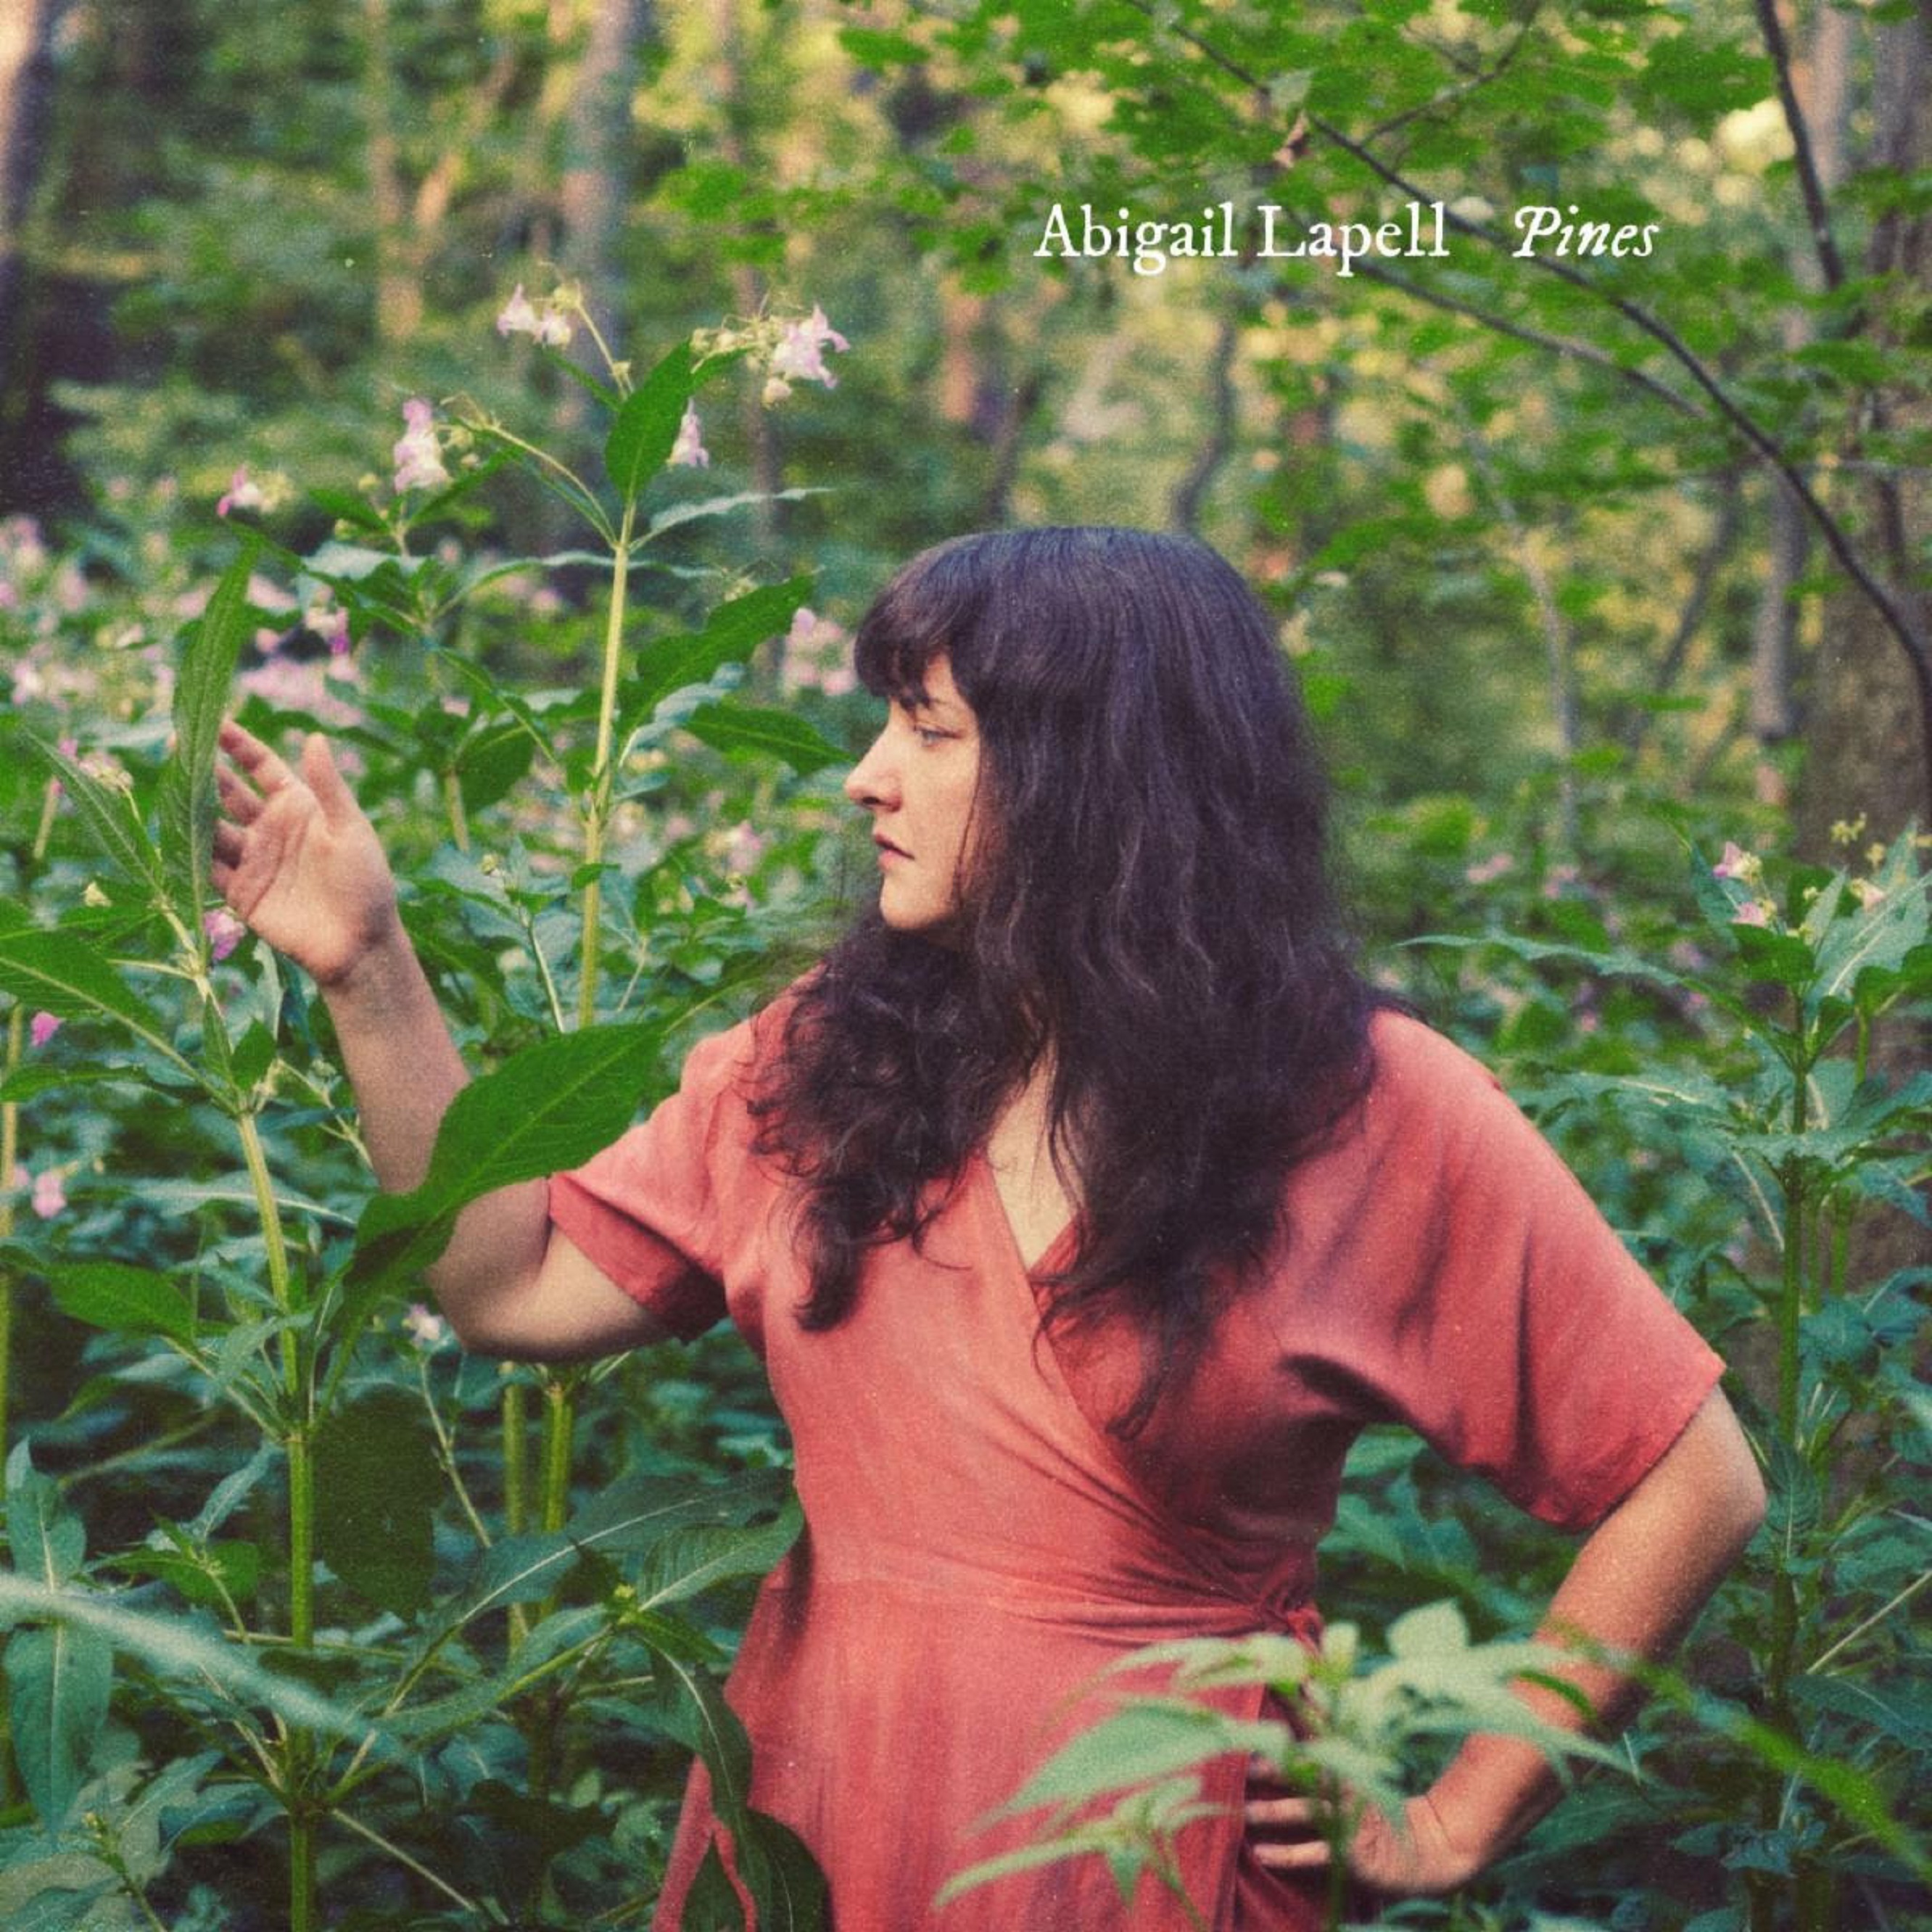 Take A Walk In The Woods With Abigail Lapell’s Intimate New Song “Pines”